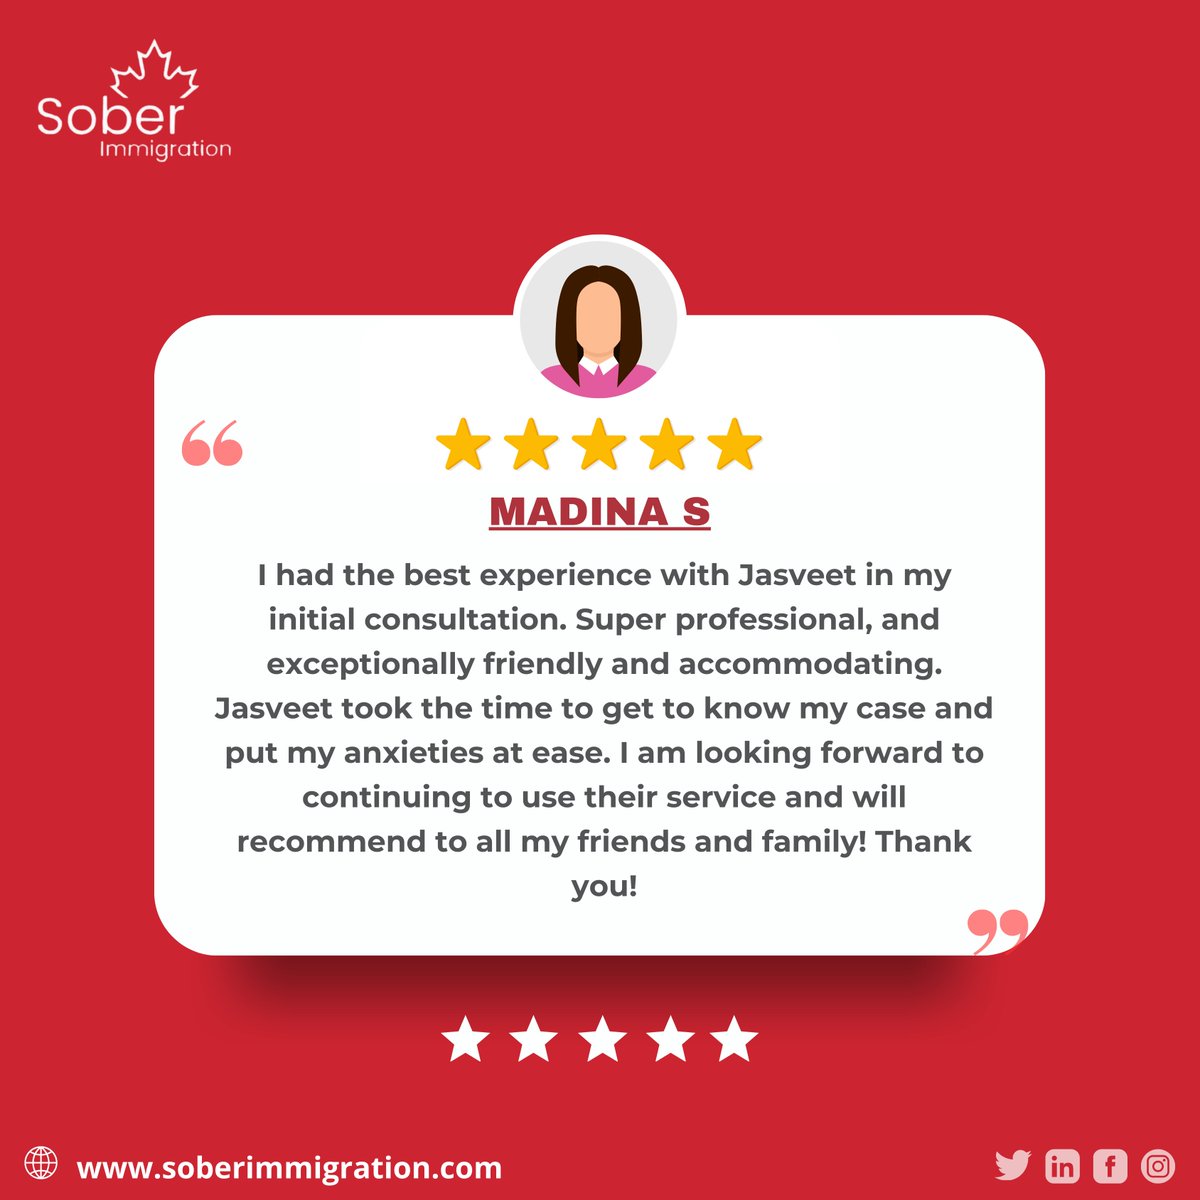 Thank you for choosing us to guide you through this journey! #ClientLove #ImmigrationJourney #ClientReview #HappyClient #Grateful #ThankYou #ImmigrationSuccess #PositiveFeedback #CustomerExperience #SatisfiedCustomer #ImmigrationExperts #TrustedService